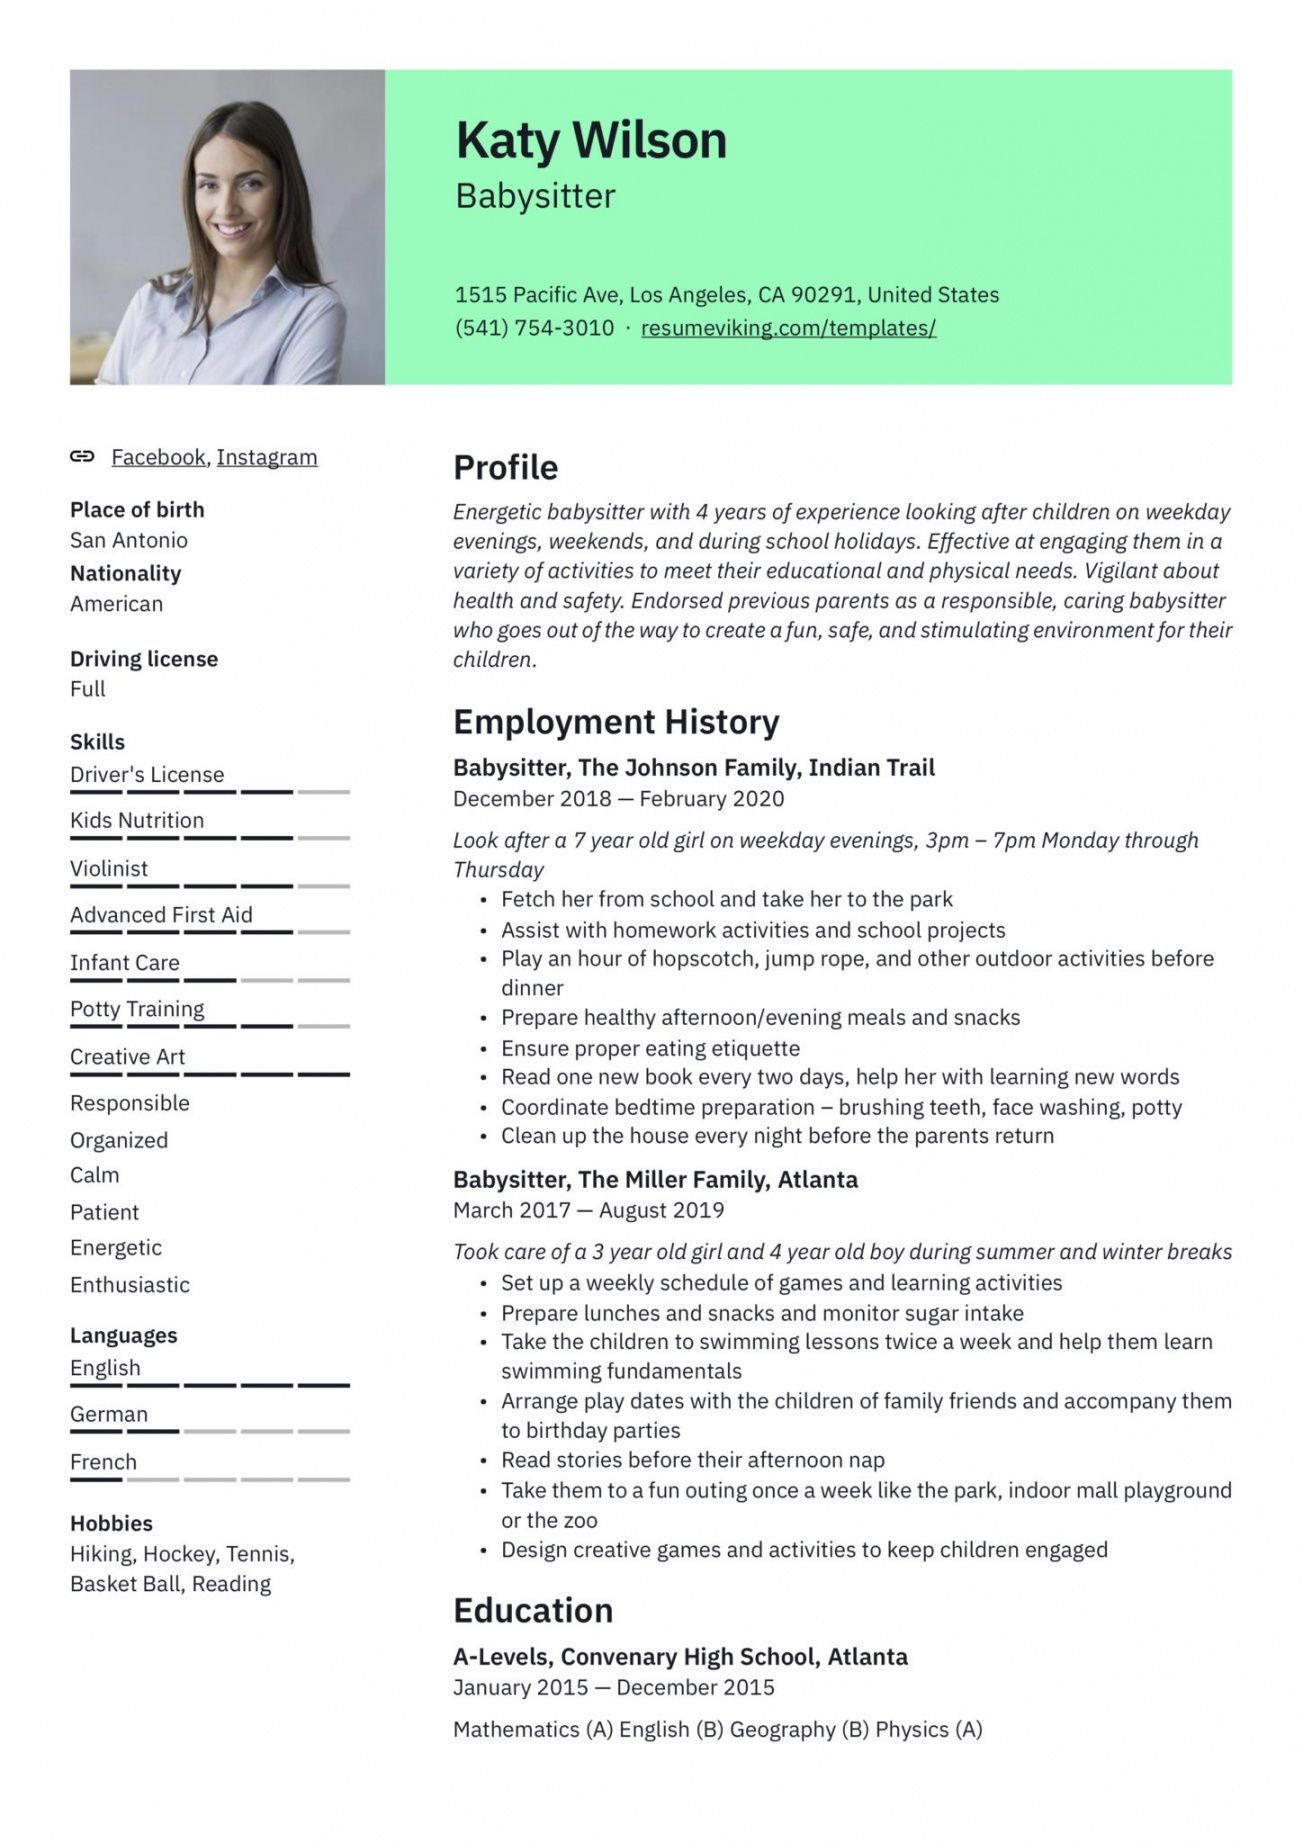 free 19 babysitter resume examples &amp; writing guide  2020  pdf babysitting job description template and sample